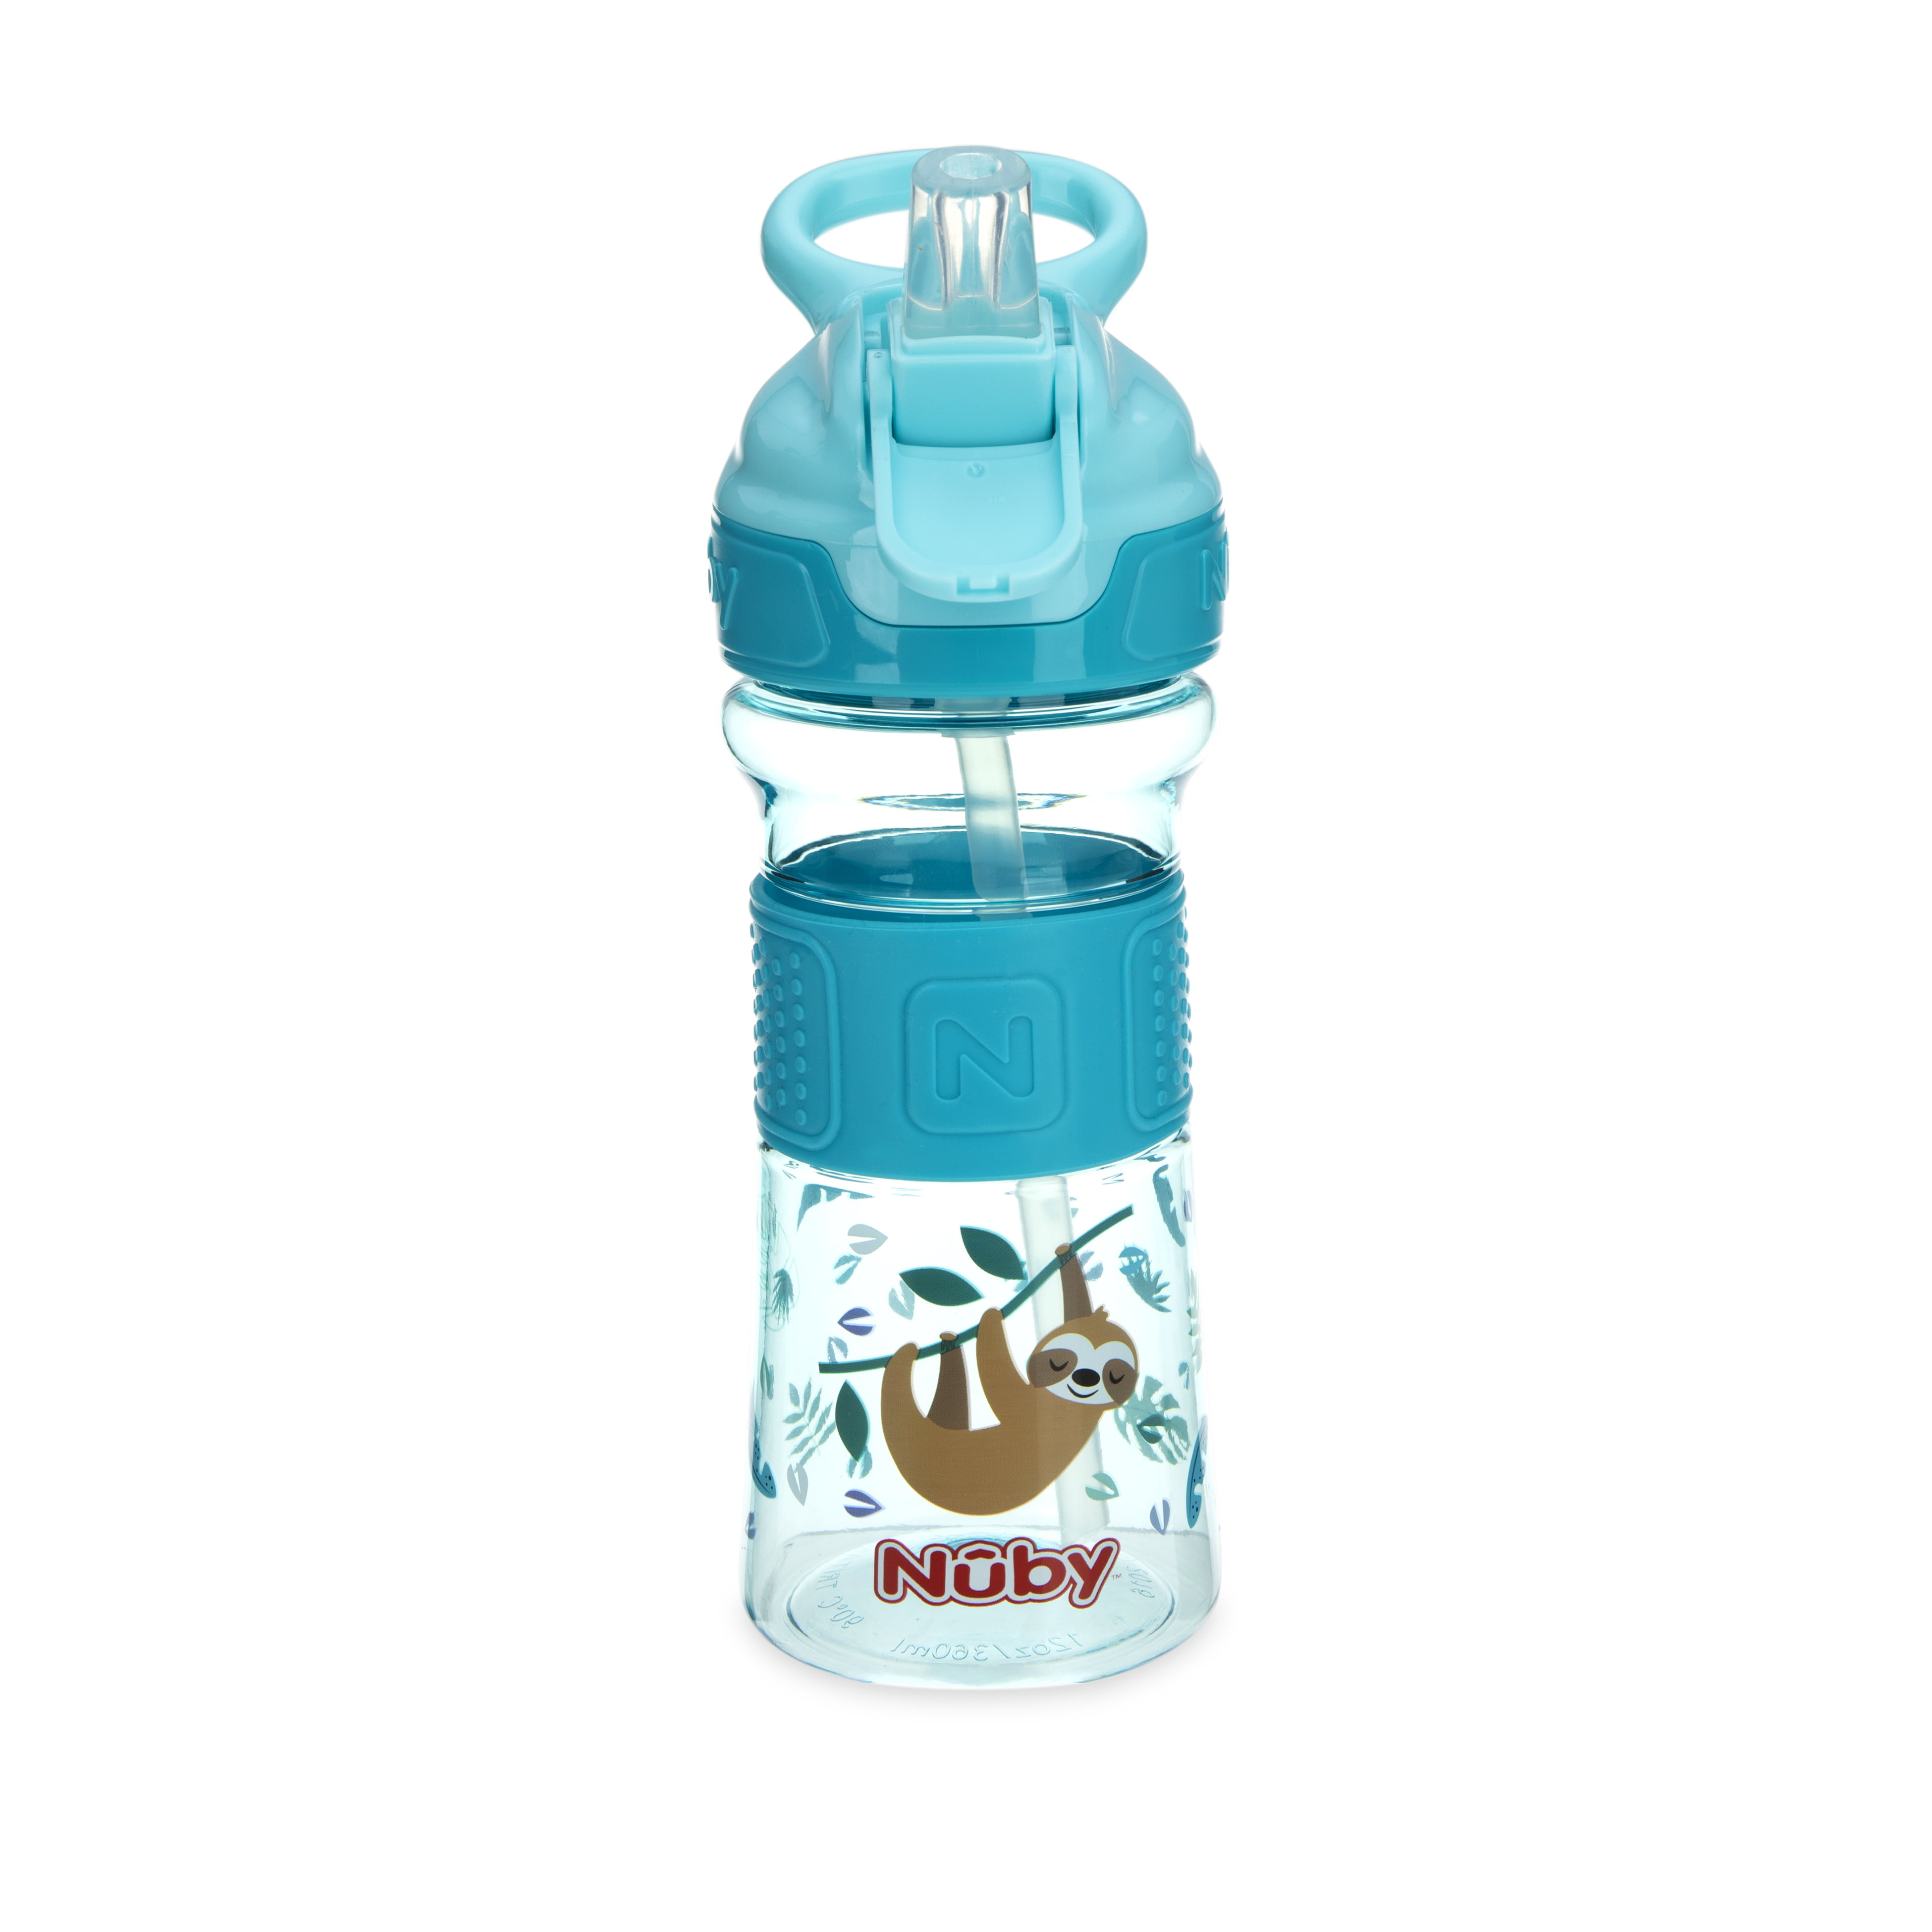 Nuby Flip-it Kids On-The-Go Printed Water Bottle with Bite Proof Hard Straw  - 12oz / 360 ml, 18+ Mon…See more Nuby Flip-it Kids On-The-Go Printed